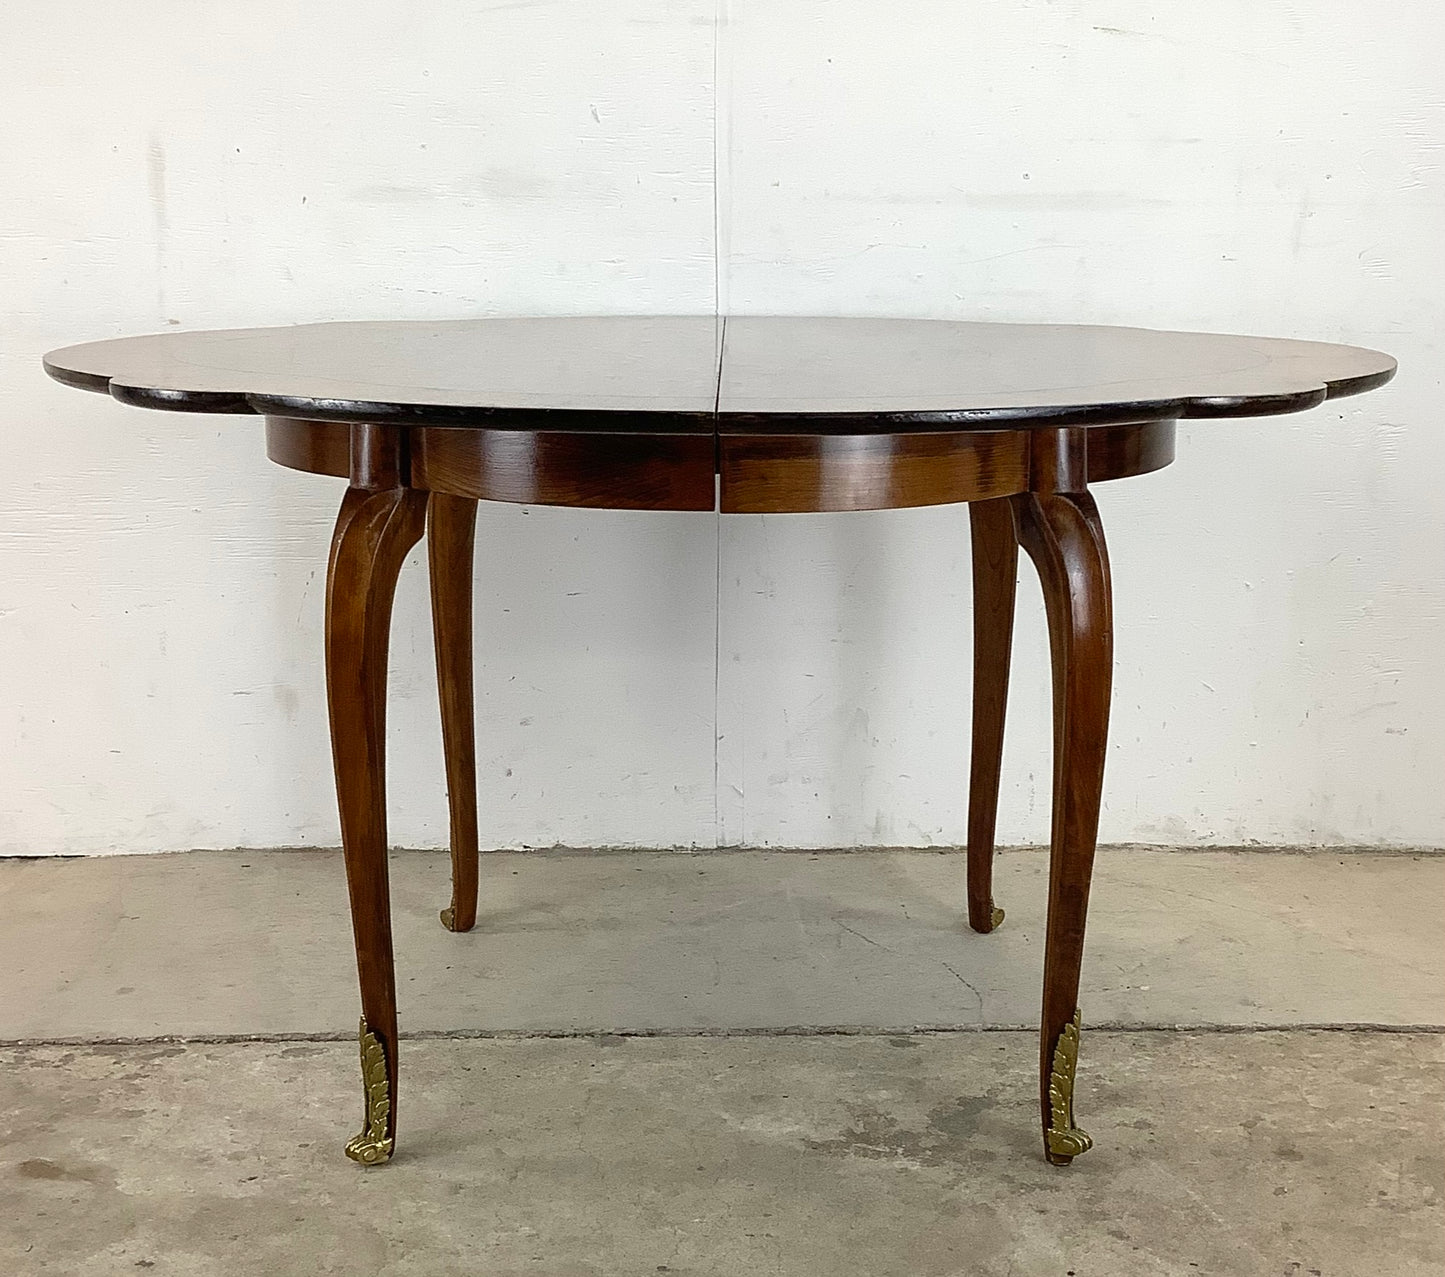 Vintage Oval Dining Room Table With Scalloped Edges and Removable Leaves